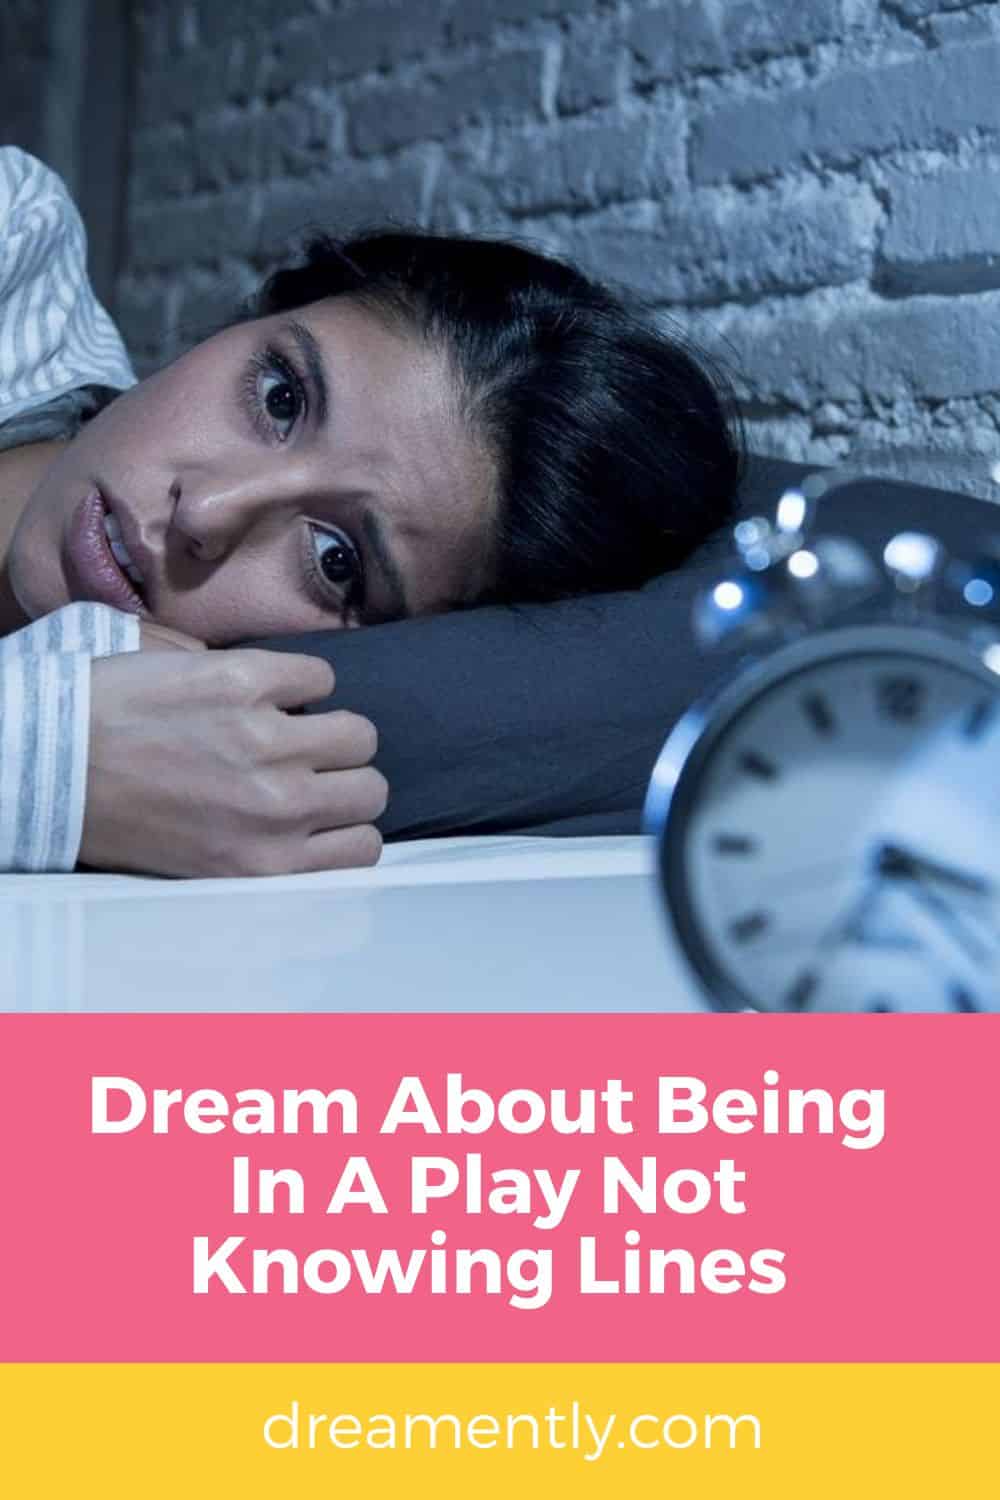 Dream About Being In A Play Not Knowing Lines